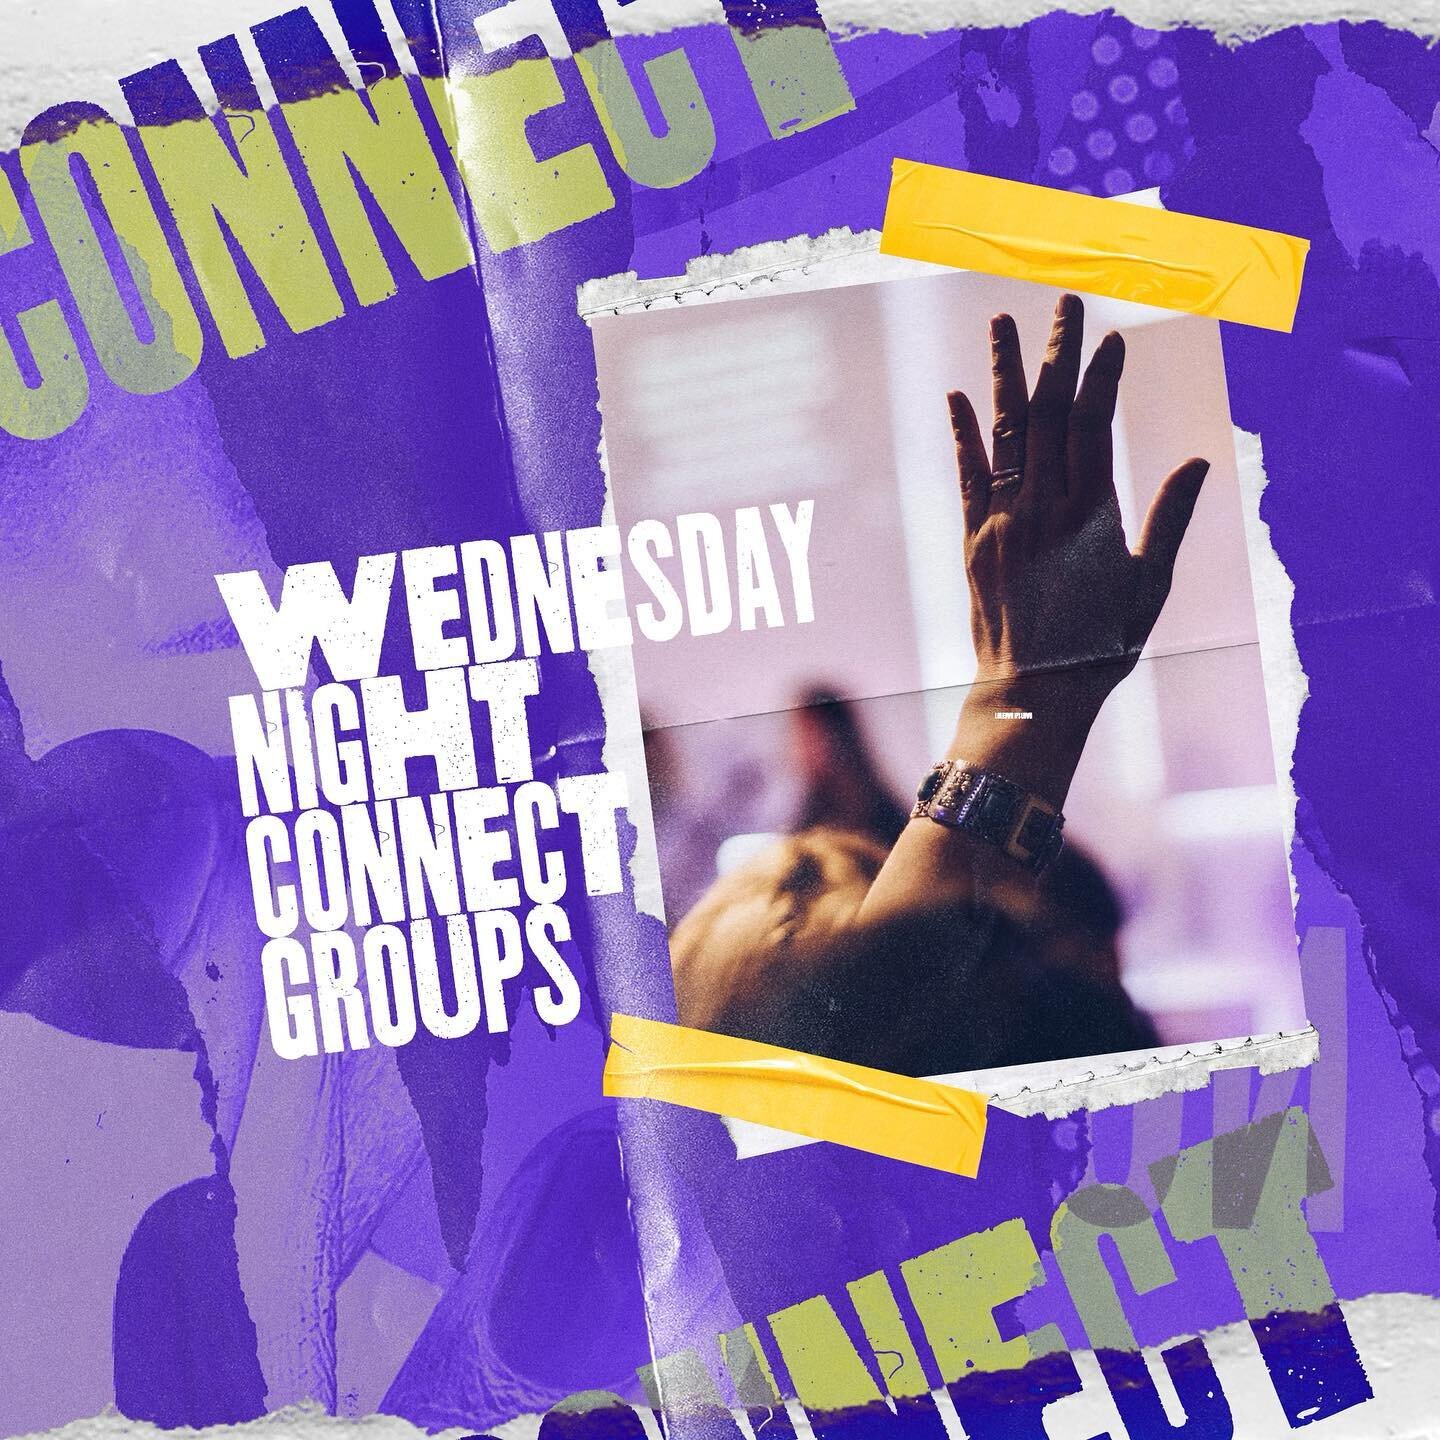 Join us TOMORROW night at 7pm for Cause Kids, The Effect YTH, or one of our Wednesday night connect groups!